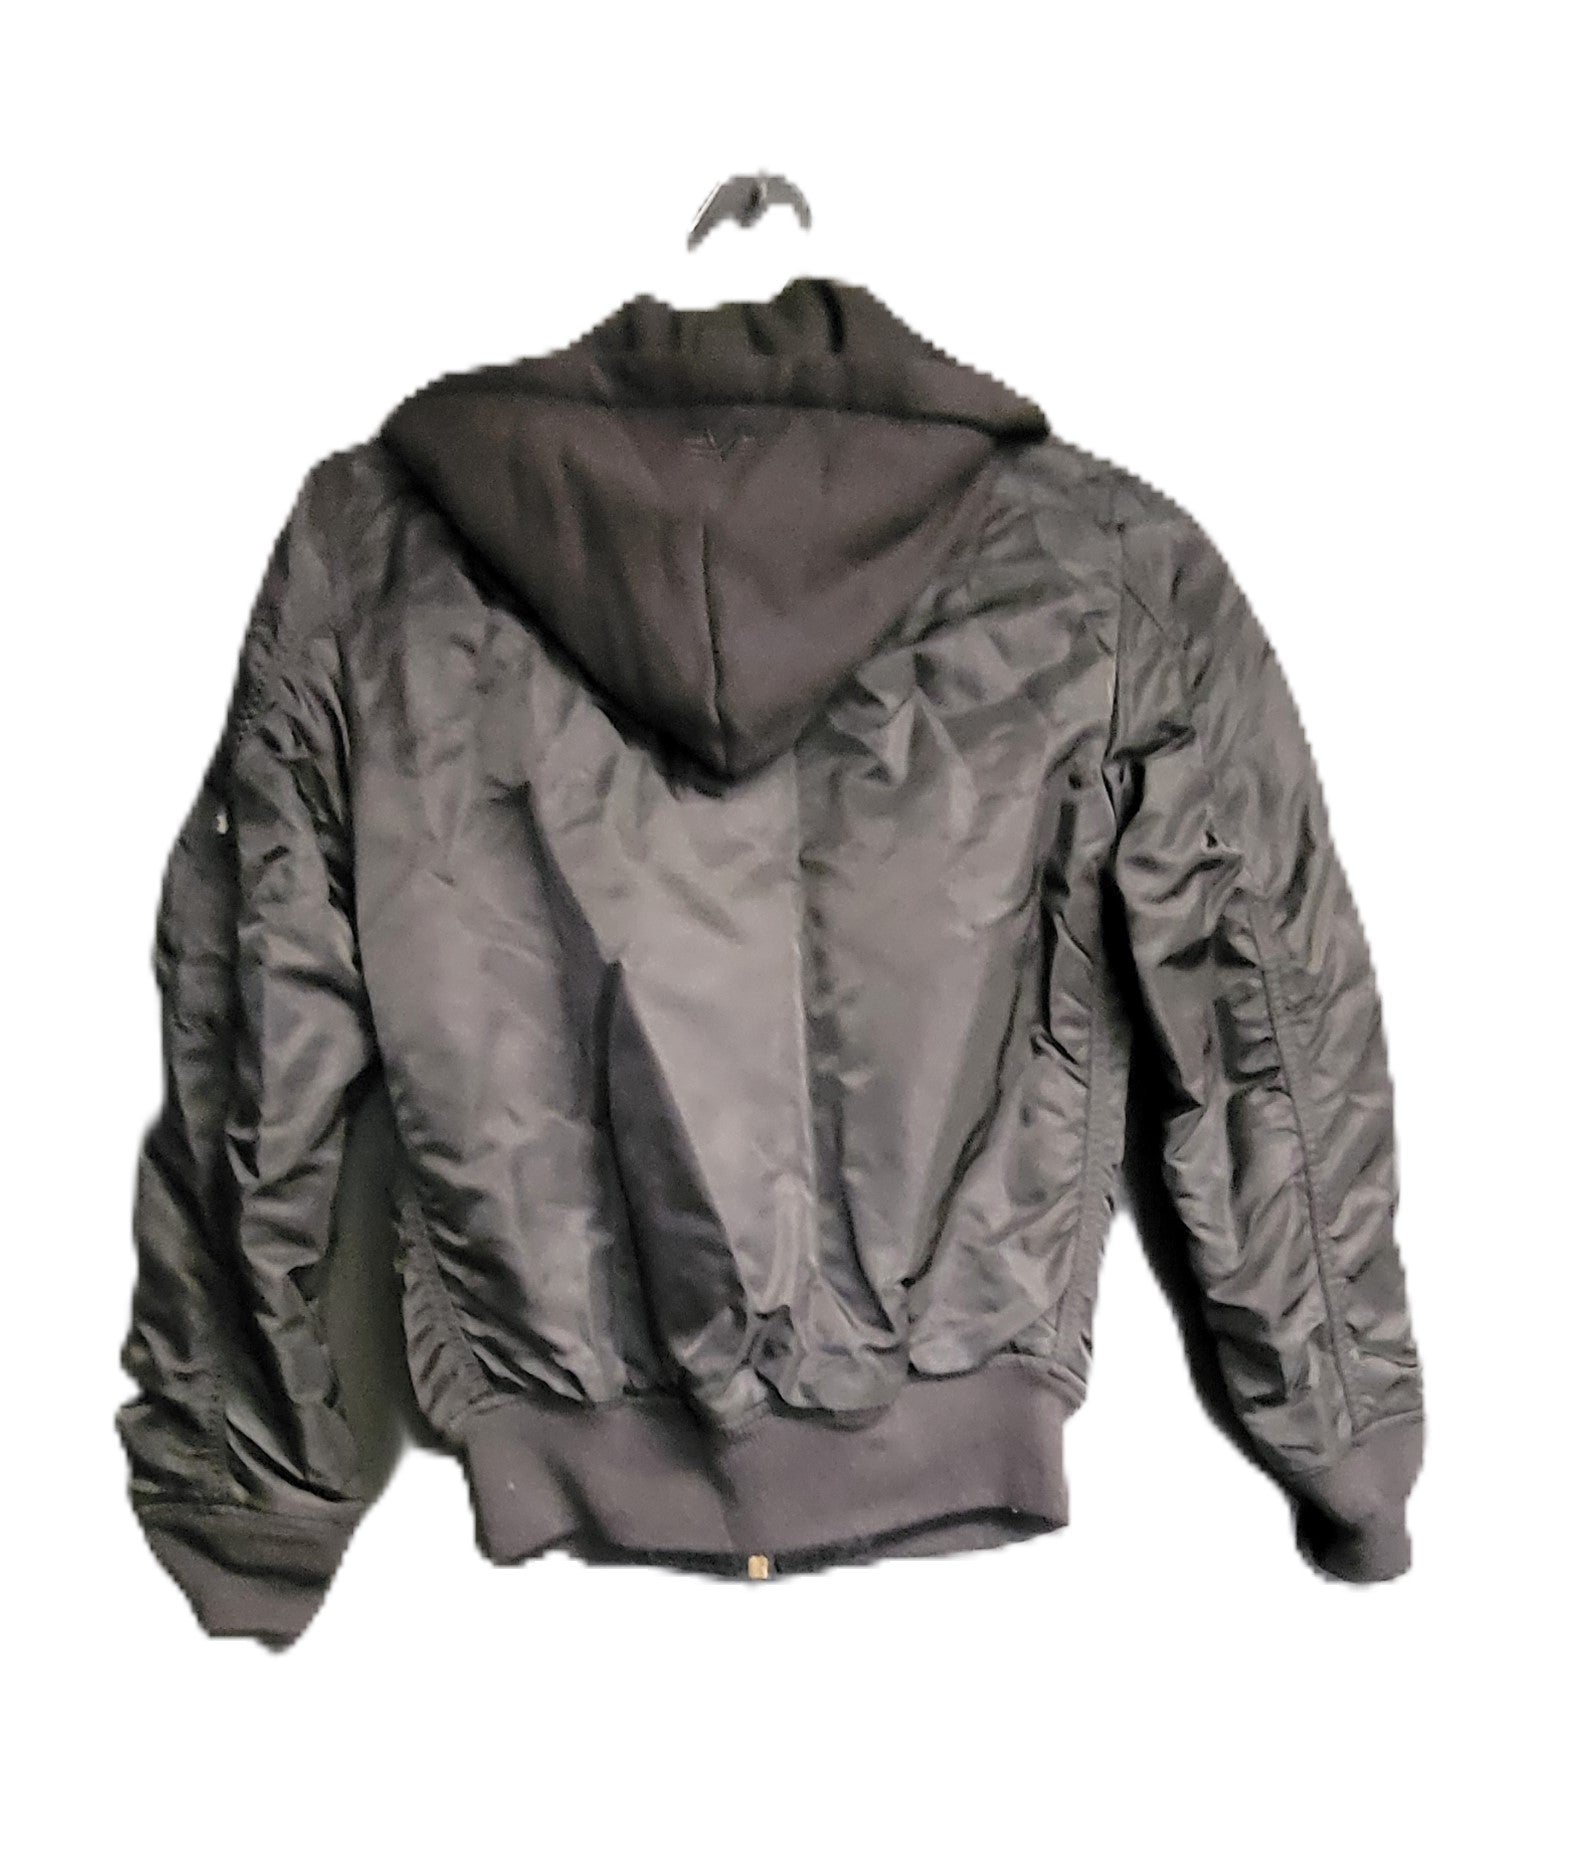 ALPHA INDUSTRIES MA-1 Natus Jacket in Black & New Silver Lining Size X-Small